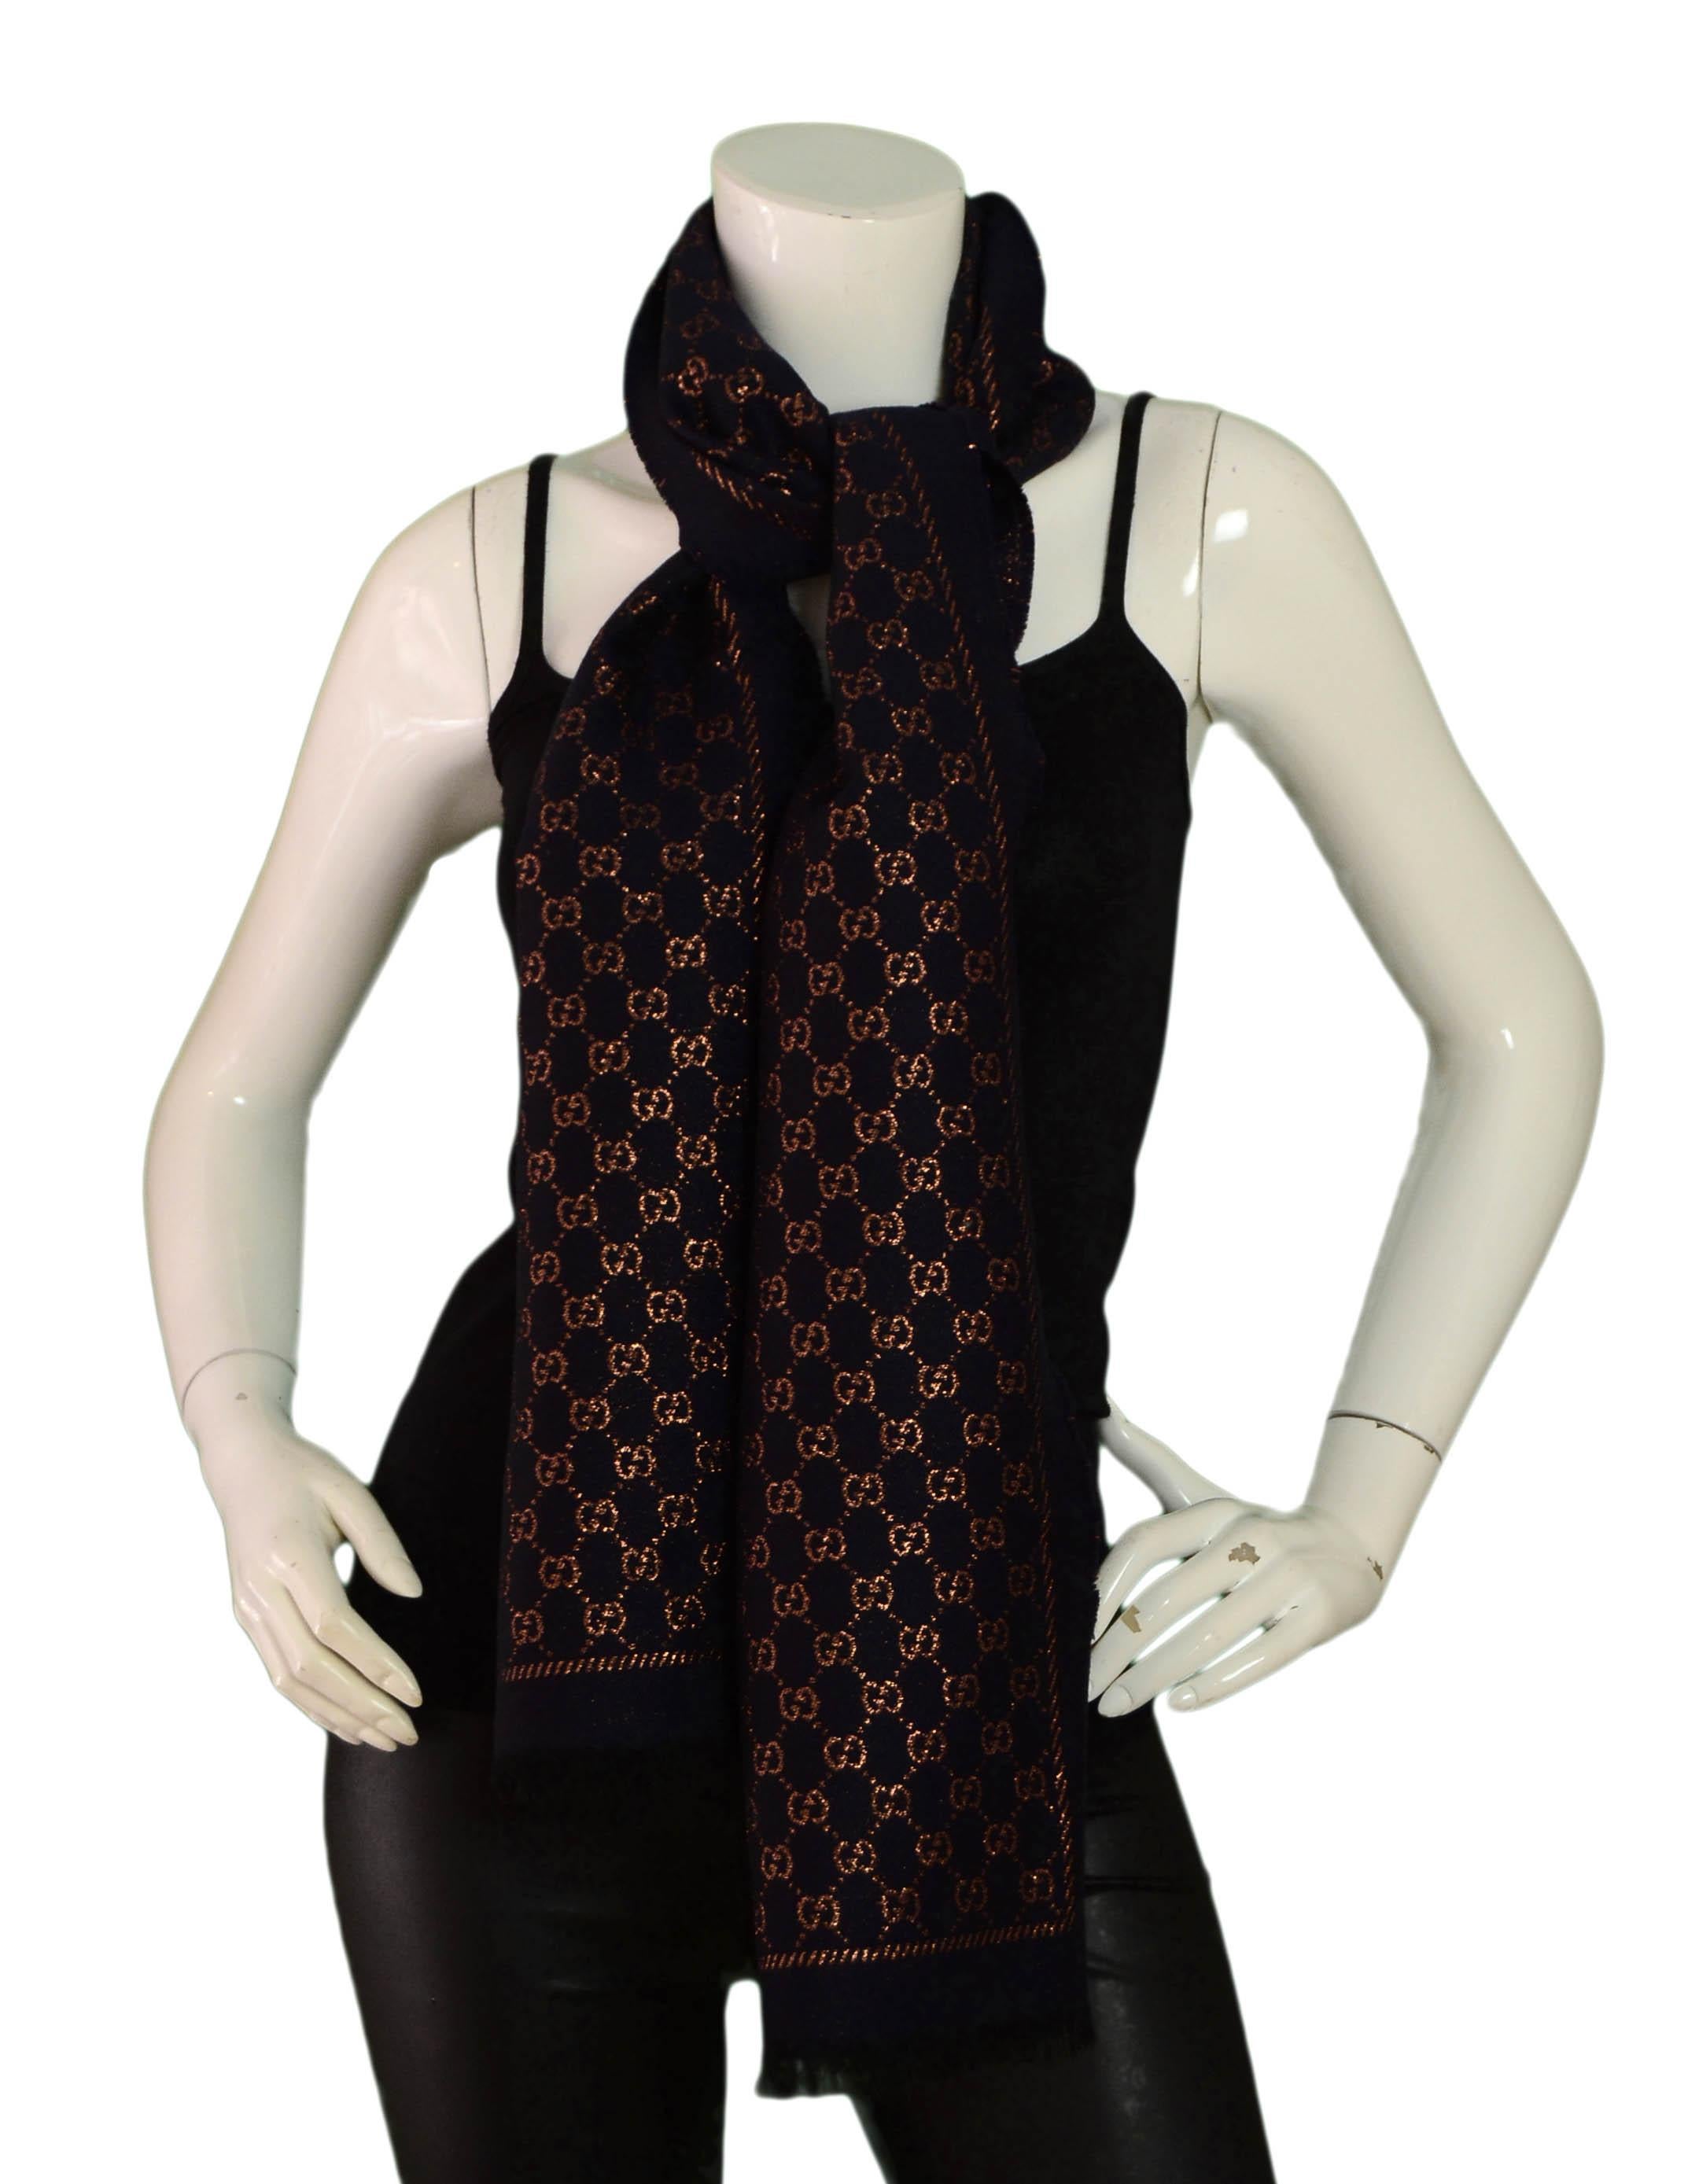 Gucci Navy/Bronze Metallic Monogram GG Wool Scarf

Made In: Italy
Color: Navy with metallic bronze
Materials: 84% wool, 7% silk, 5% metallised fiber
Overall Condition: Excellent pre-owned condition
Estimated Retail: $350 plus tac
Includes: Gucci